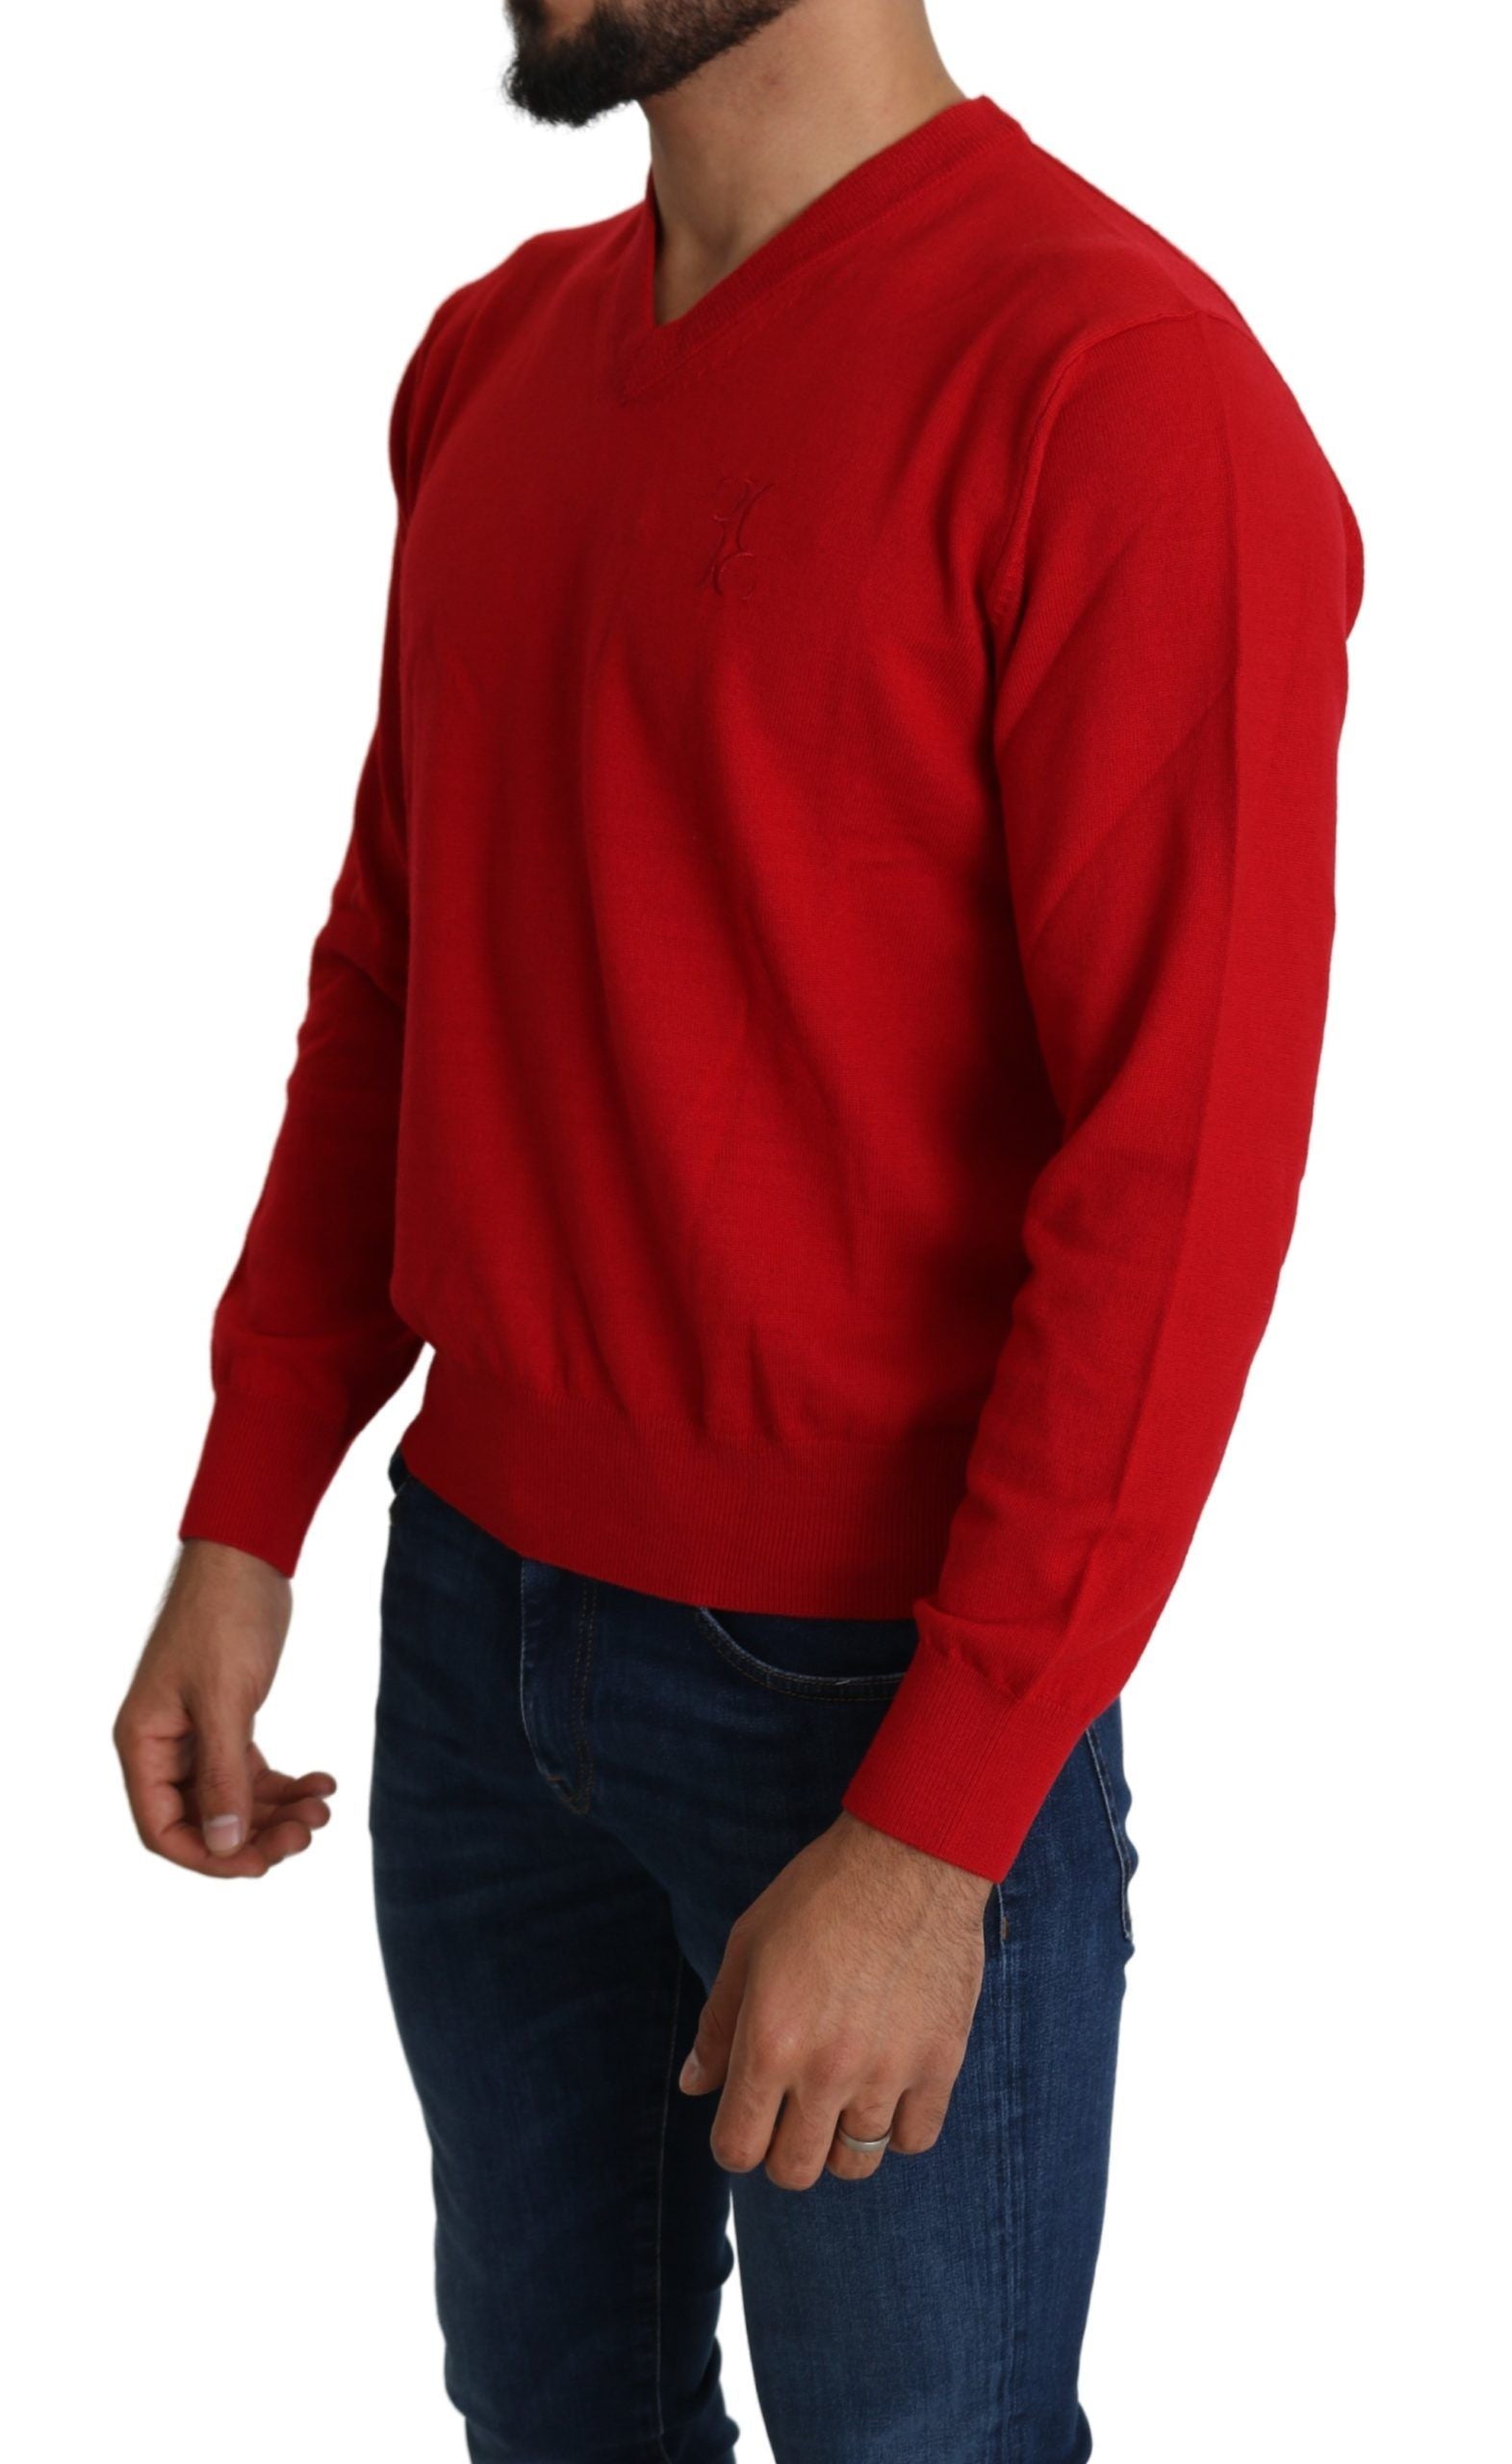 Billionaire Italian Couture Men's Red V-neck Wool Sweatshirt Pullover Sweater - Designed by Billionaire Italian Couture Available to Buy at a Discounted Price on Moon Behind The Hill Online D